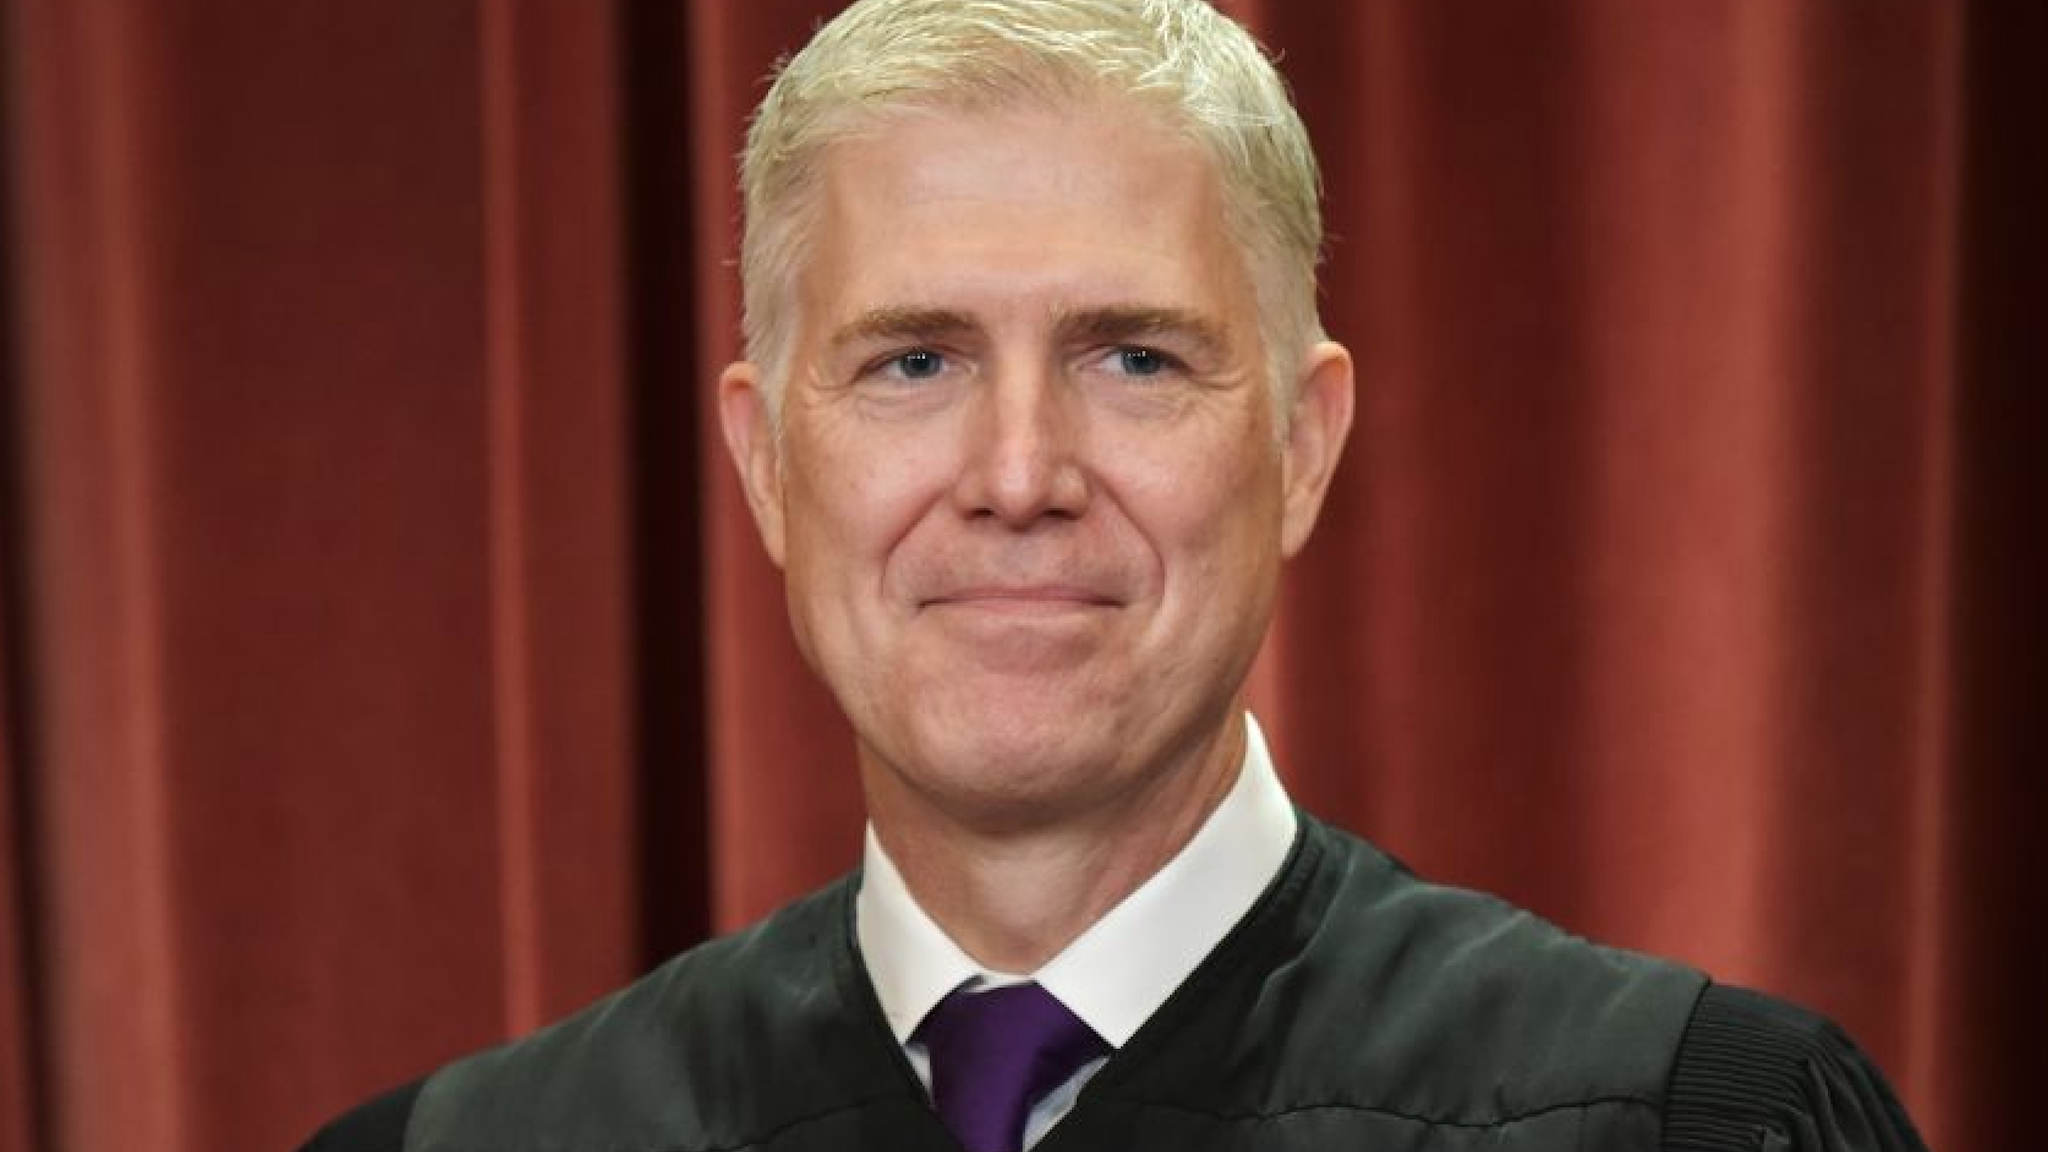 Associate Justice Neil Gorsuch poses for the official group photo at the US Supreme Court in Washington, DC on November 30, 2018.